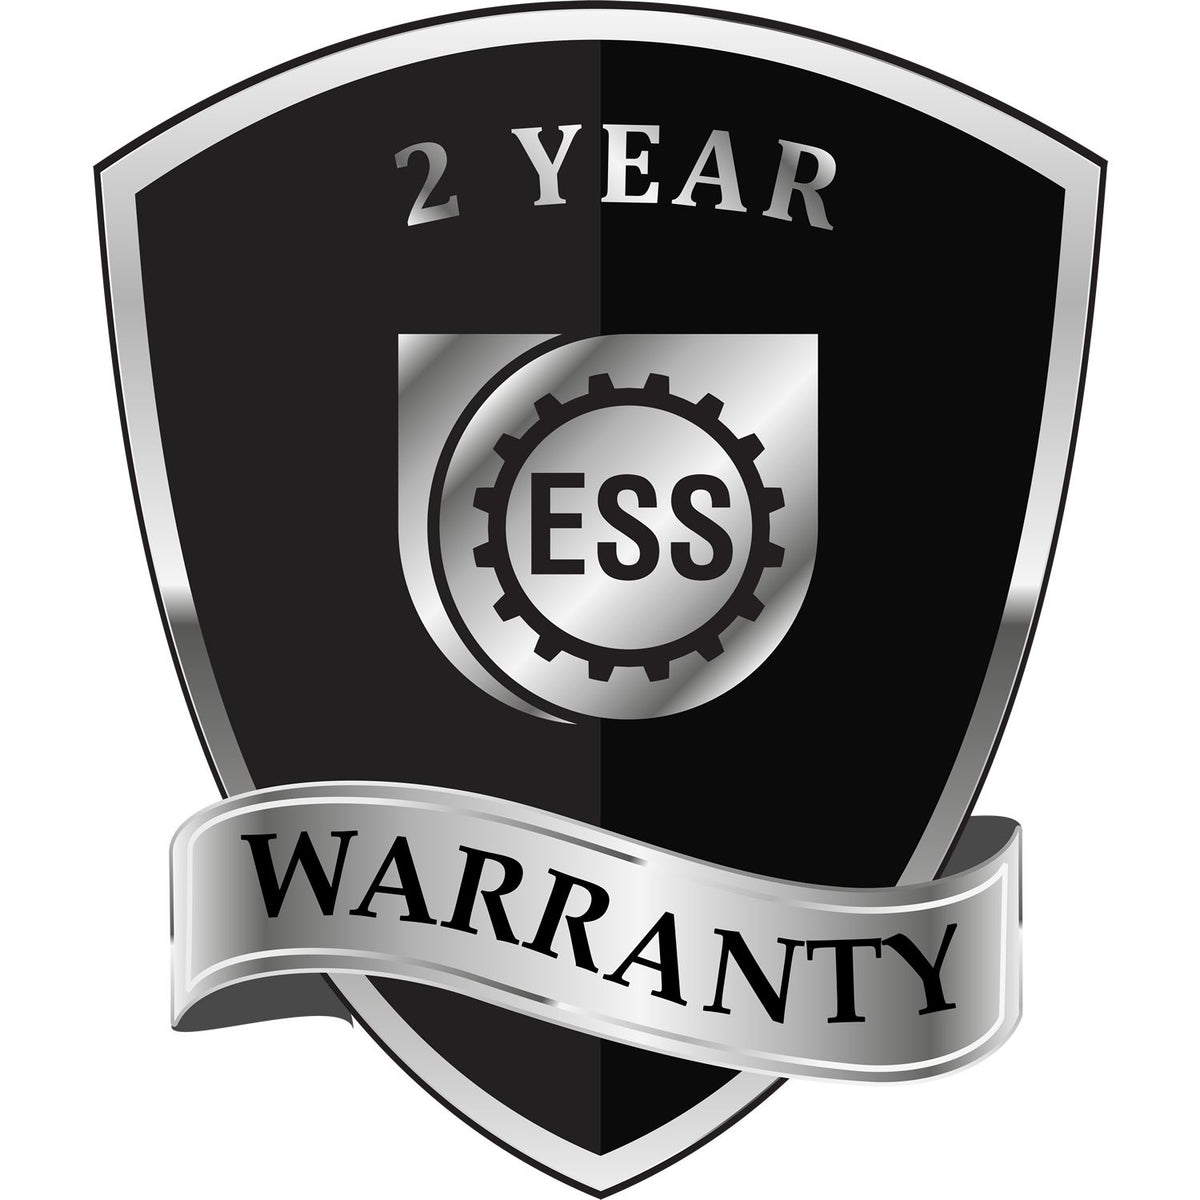 A badge or emblem showing a warranty icon for the Extended Long Reach Alaska Surveyor Embosser